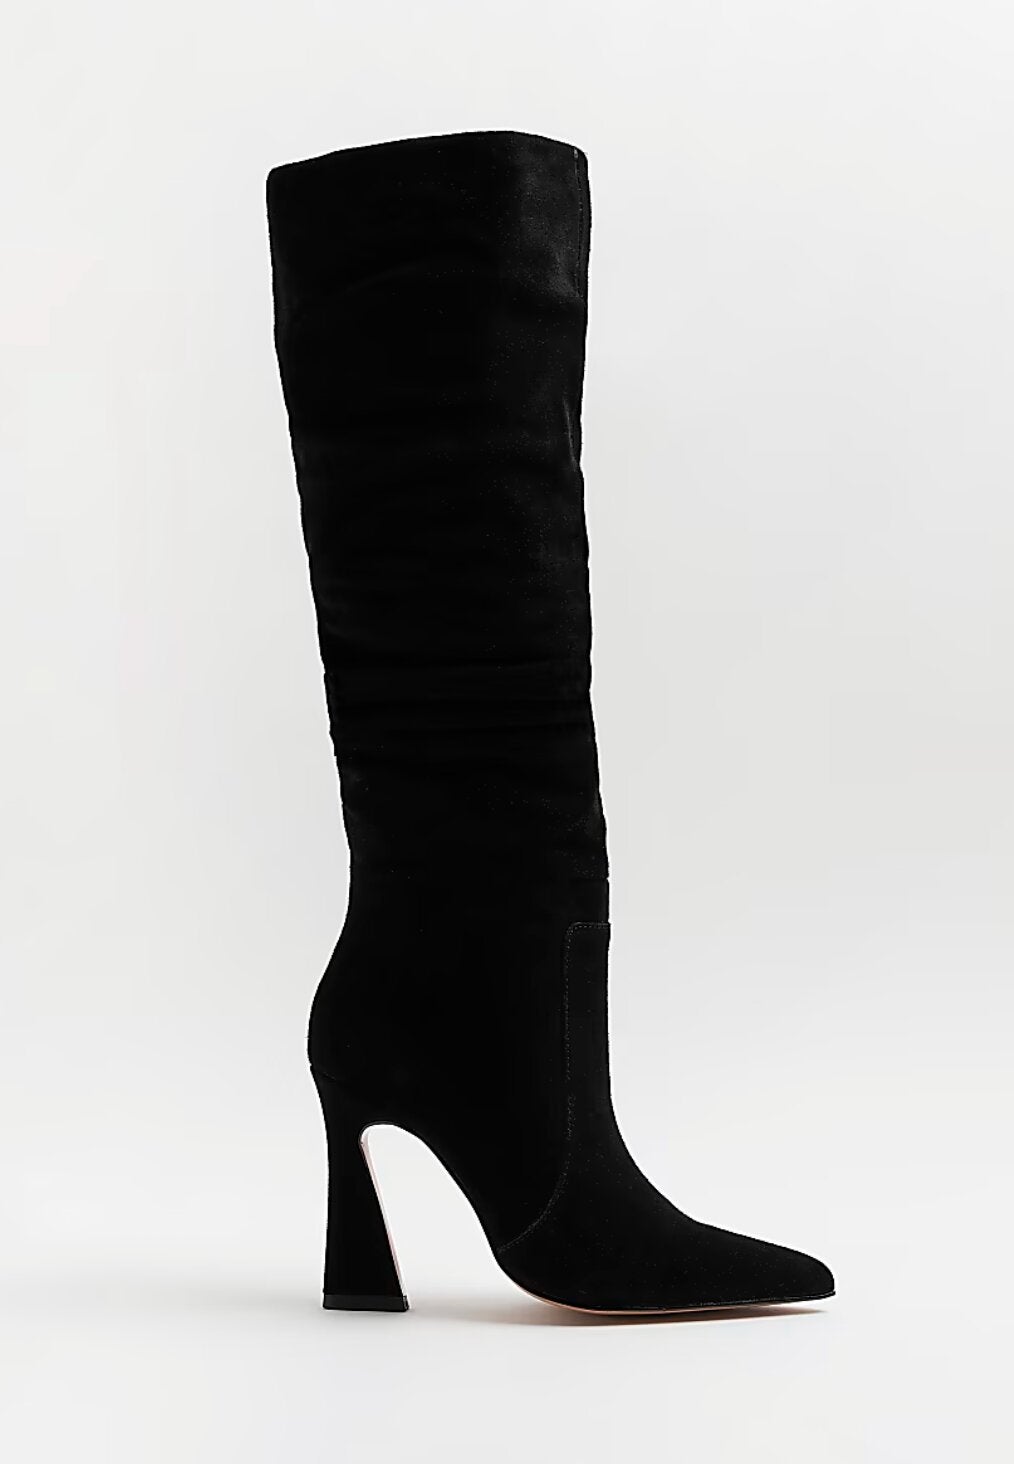 River Island + Black Suede Knee-High Heeled Boots